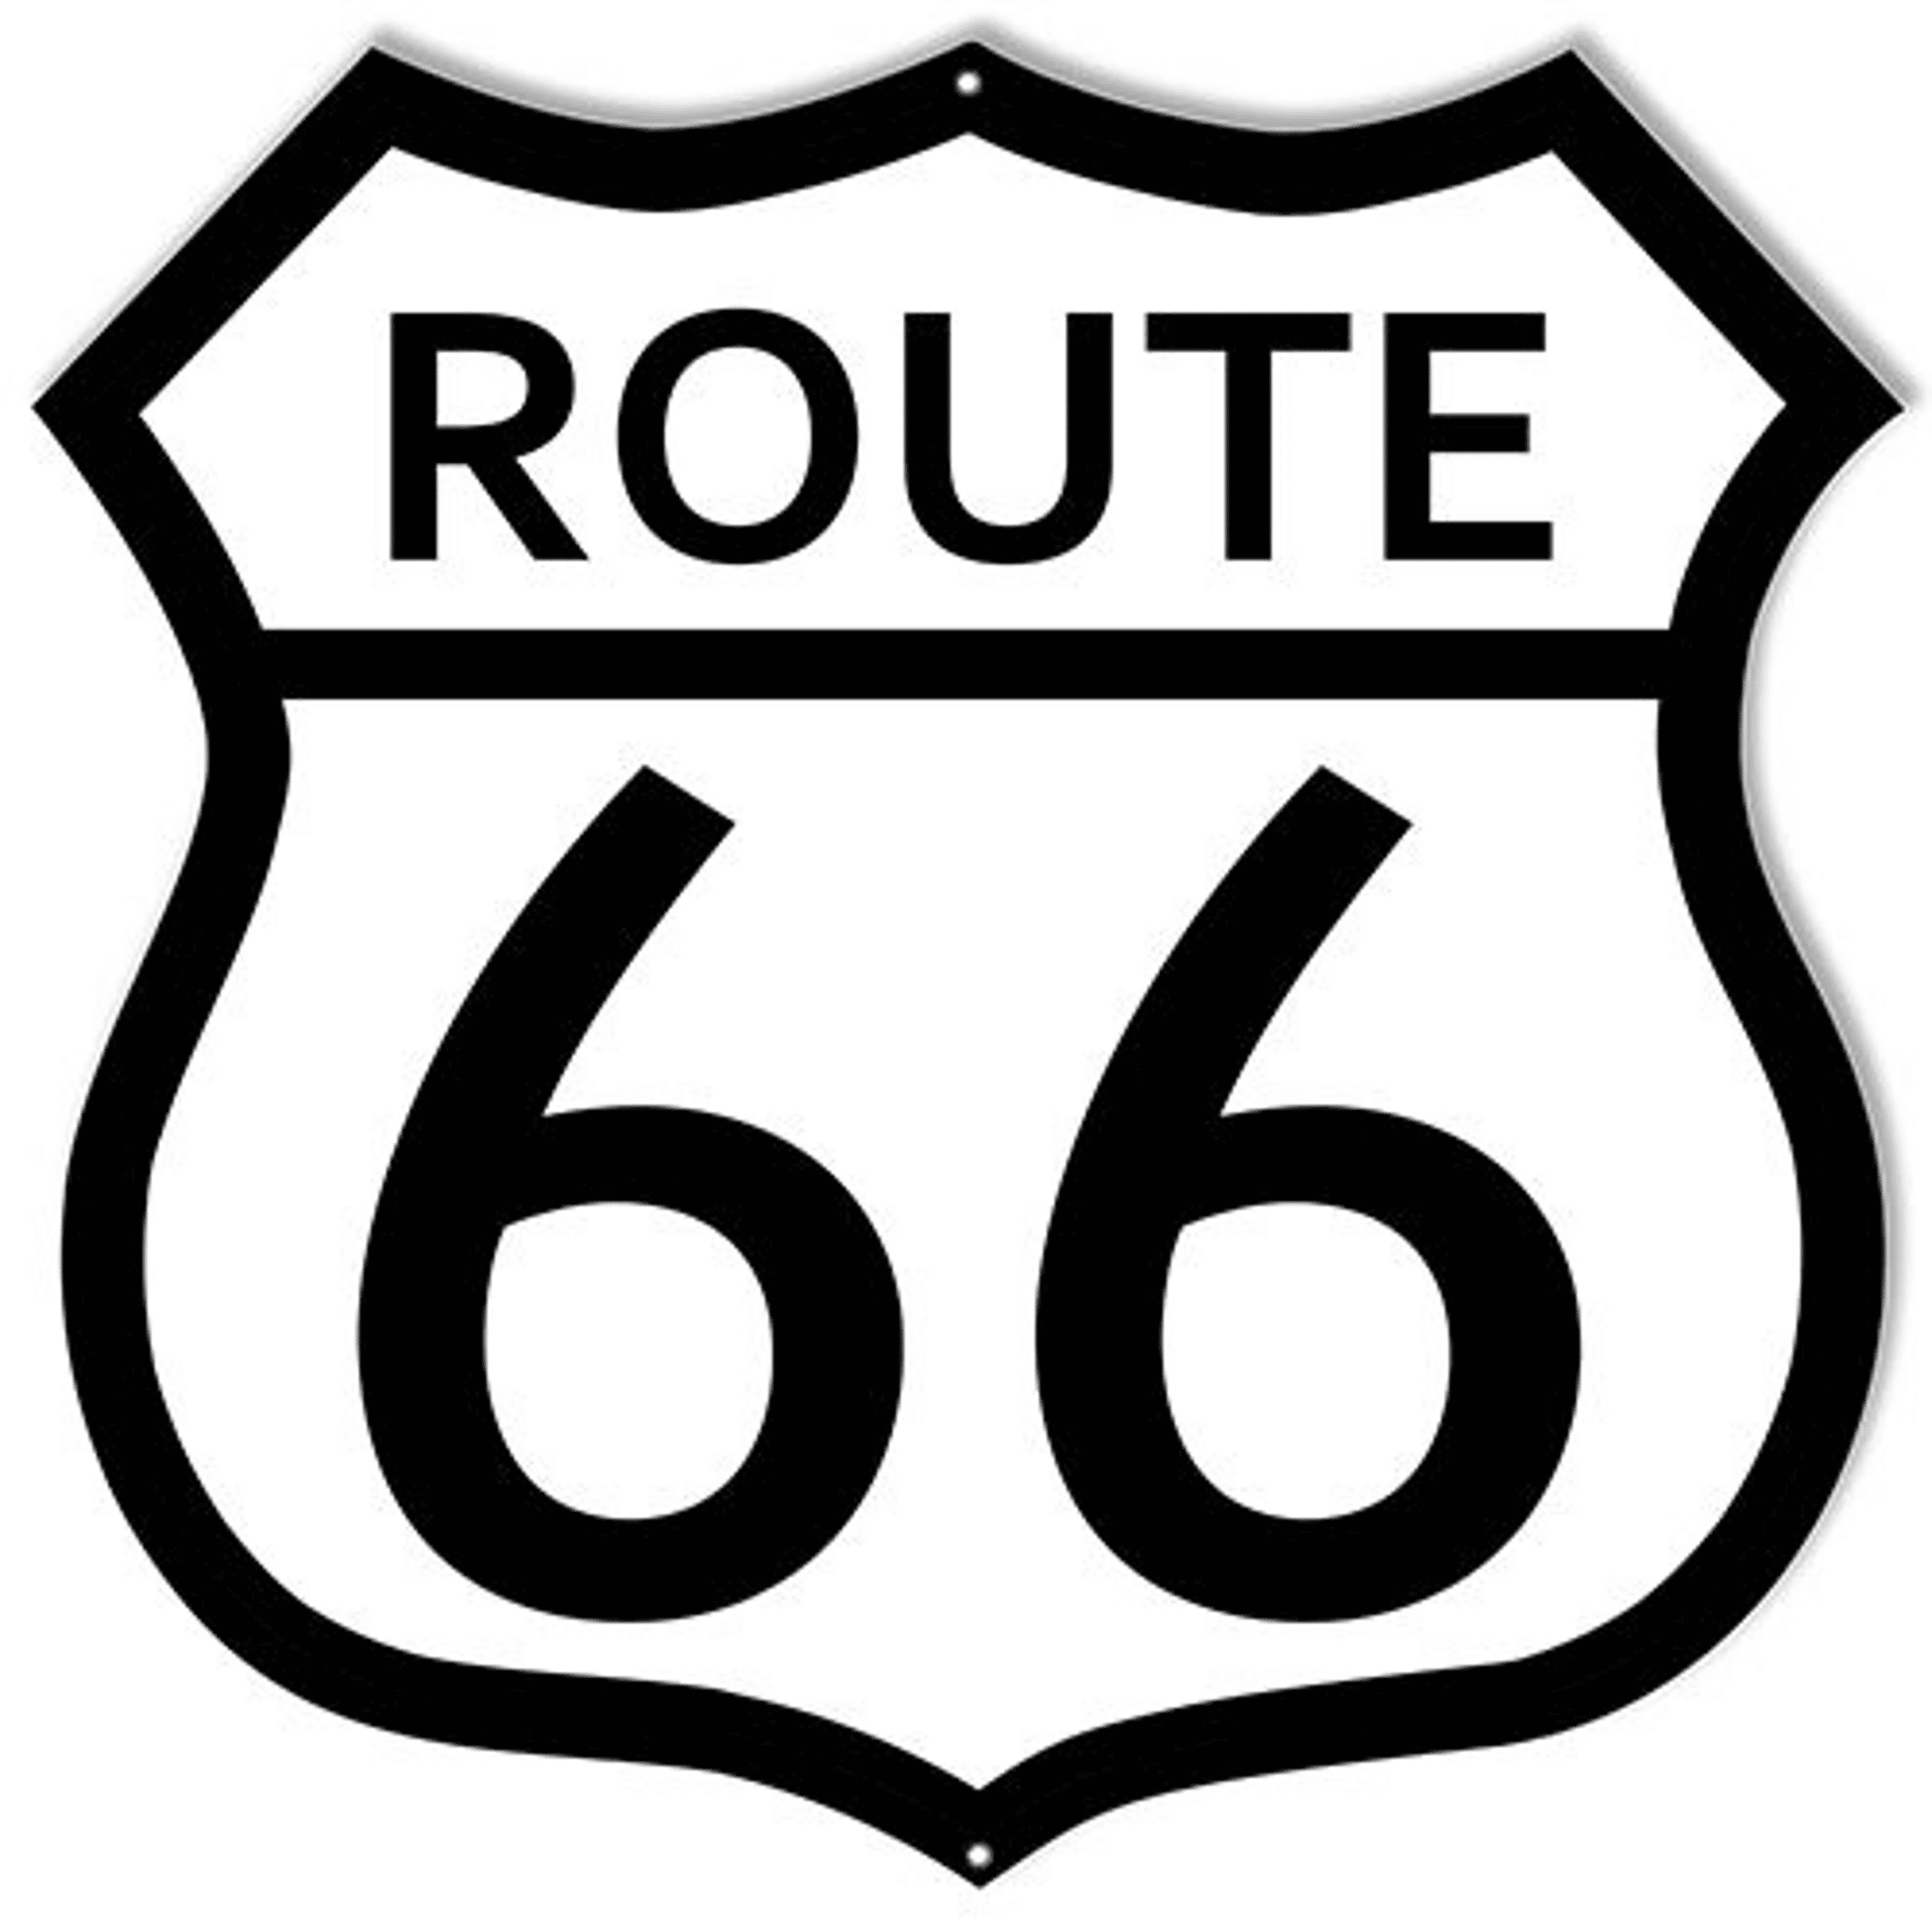 White Route 66 Aged OR New Style 22 gauge Steel Metal Sign 15 x 15 Inches Vintage Style Retro Garage Art RG